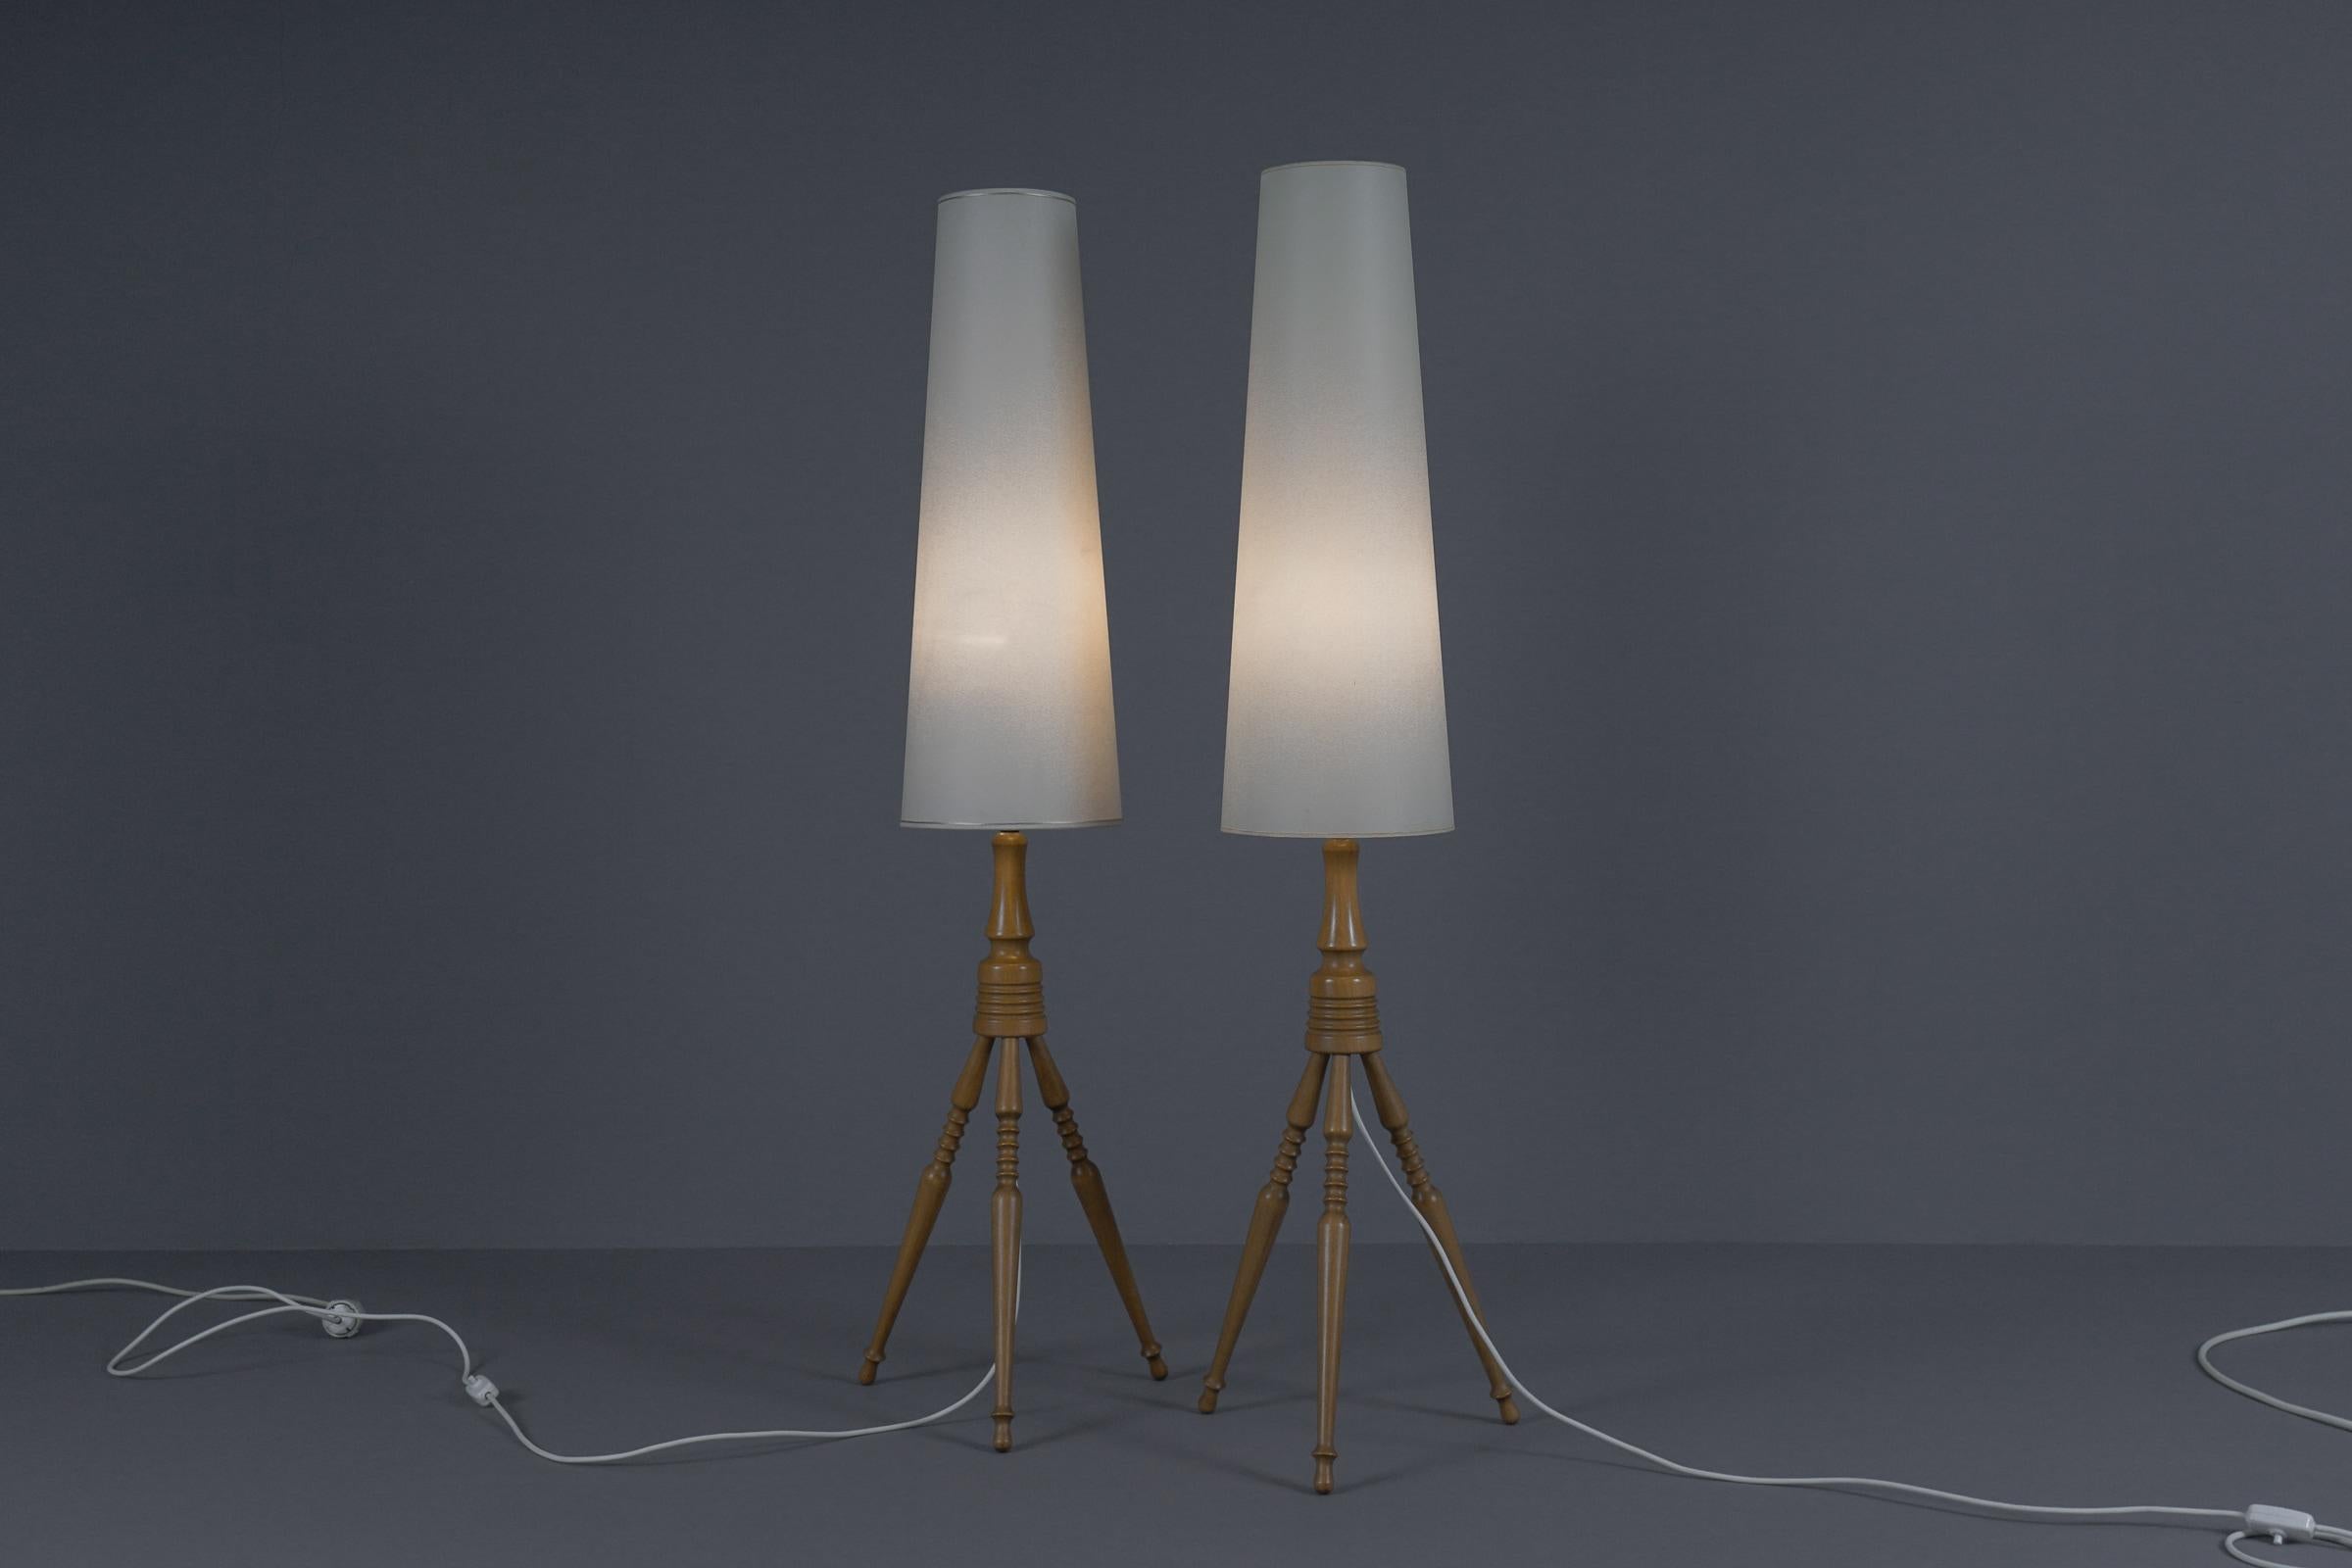 French Lovely Pair Mid-Century Modern Floor Lamps in Wood, 1960s, France For Sale